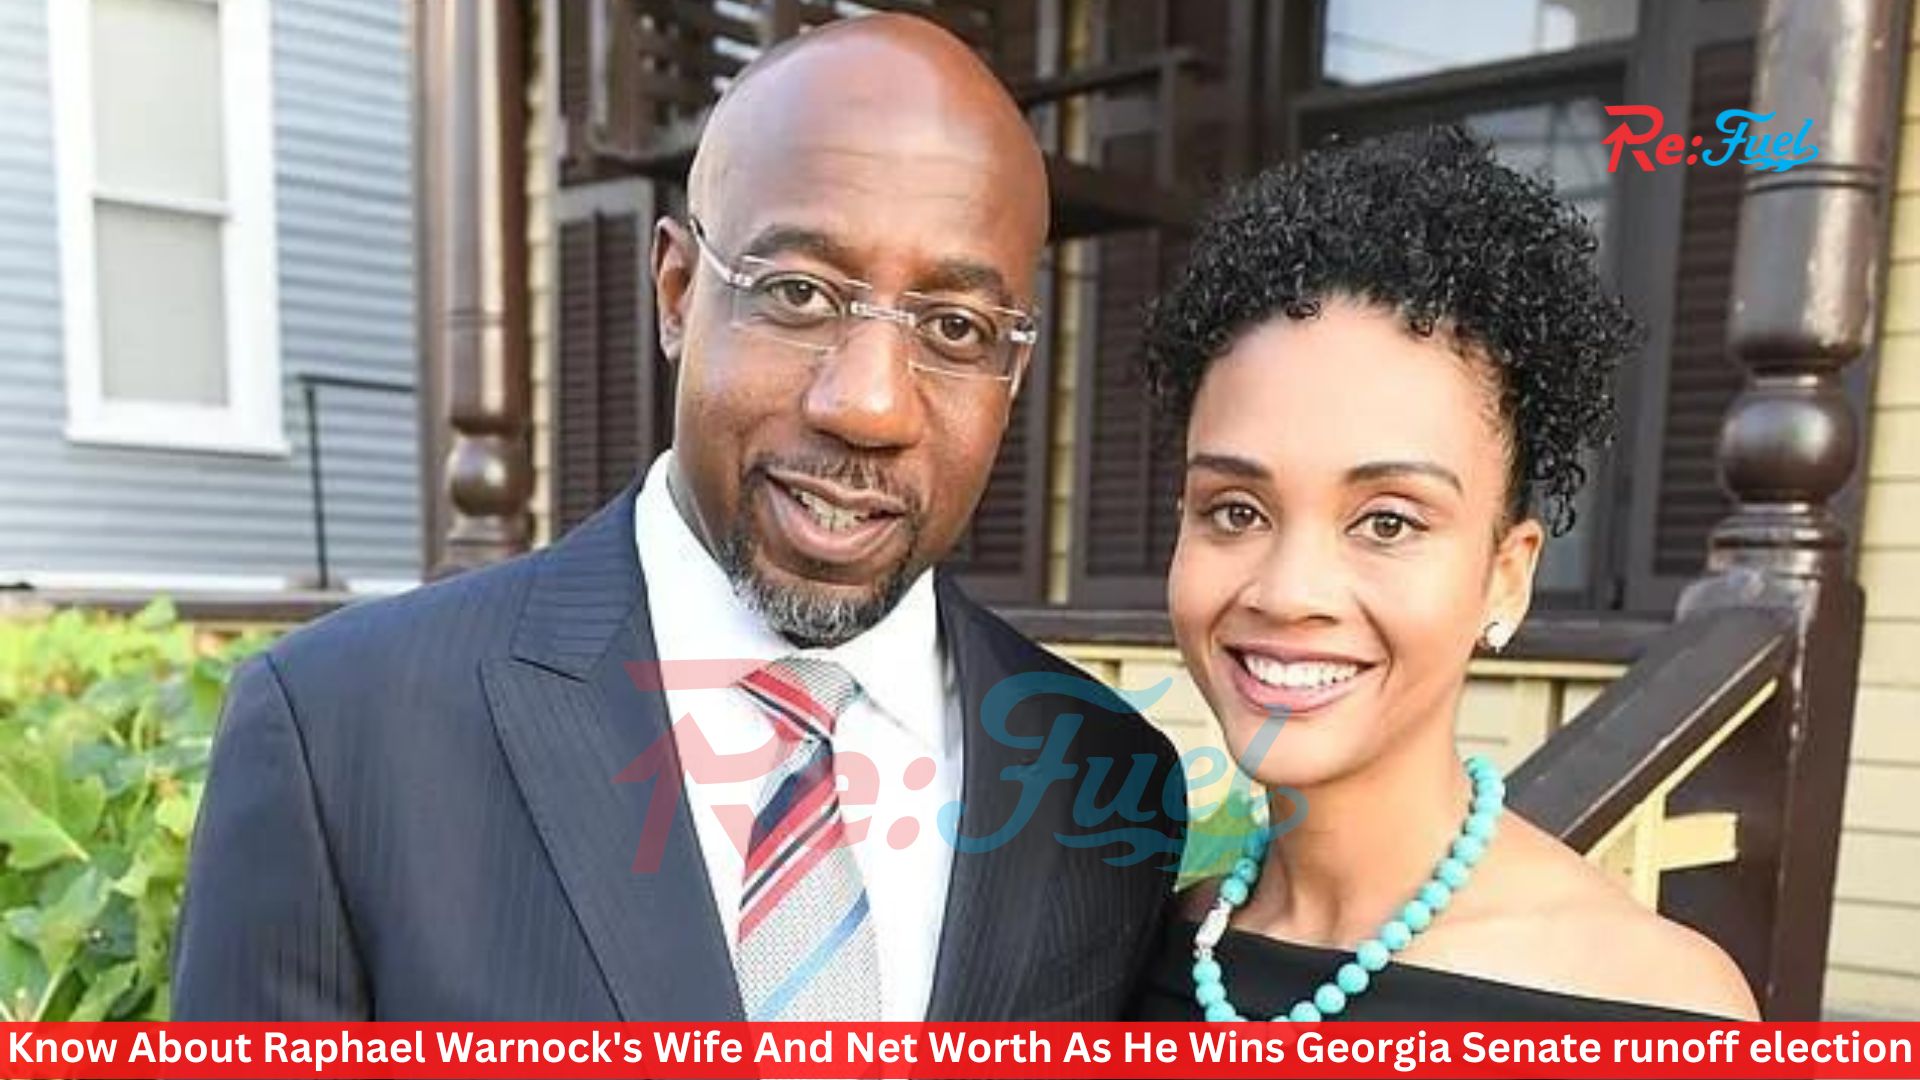 All You Need To Know About Raphael Warnock's Wife And Net Worth!